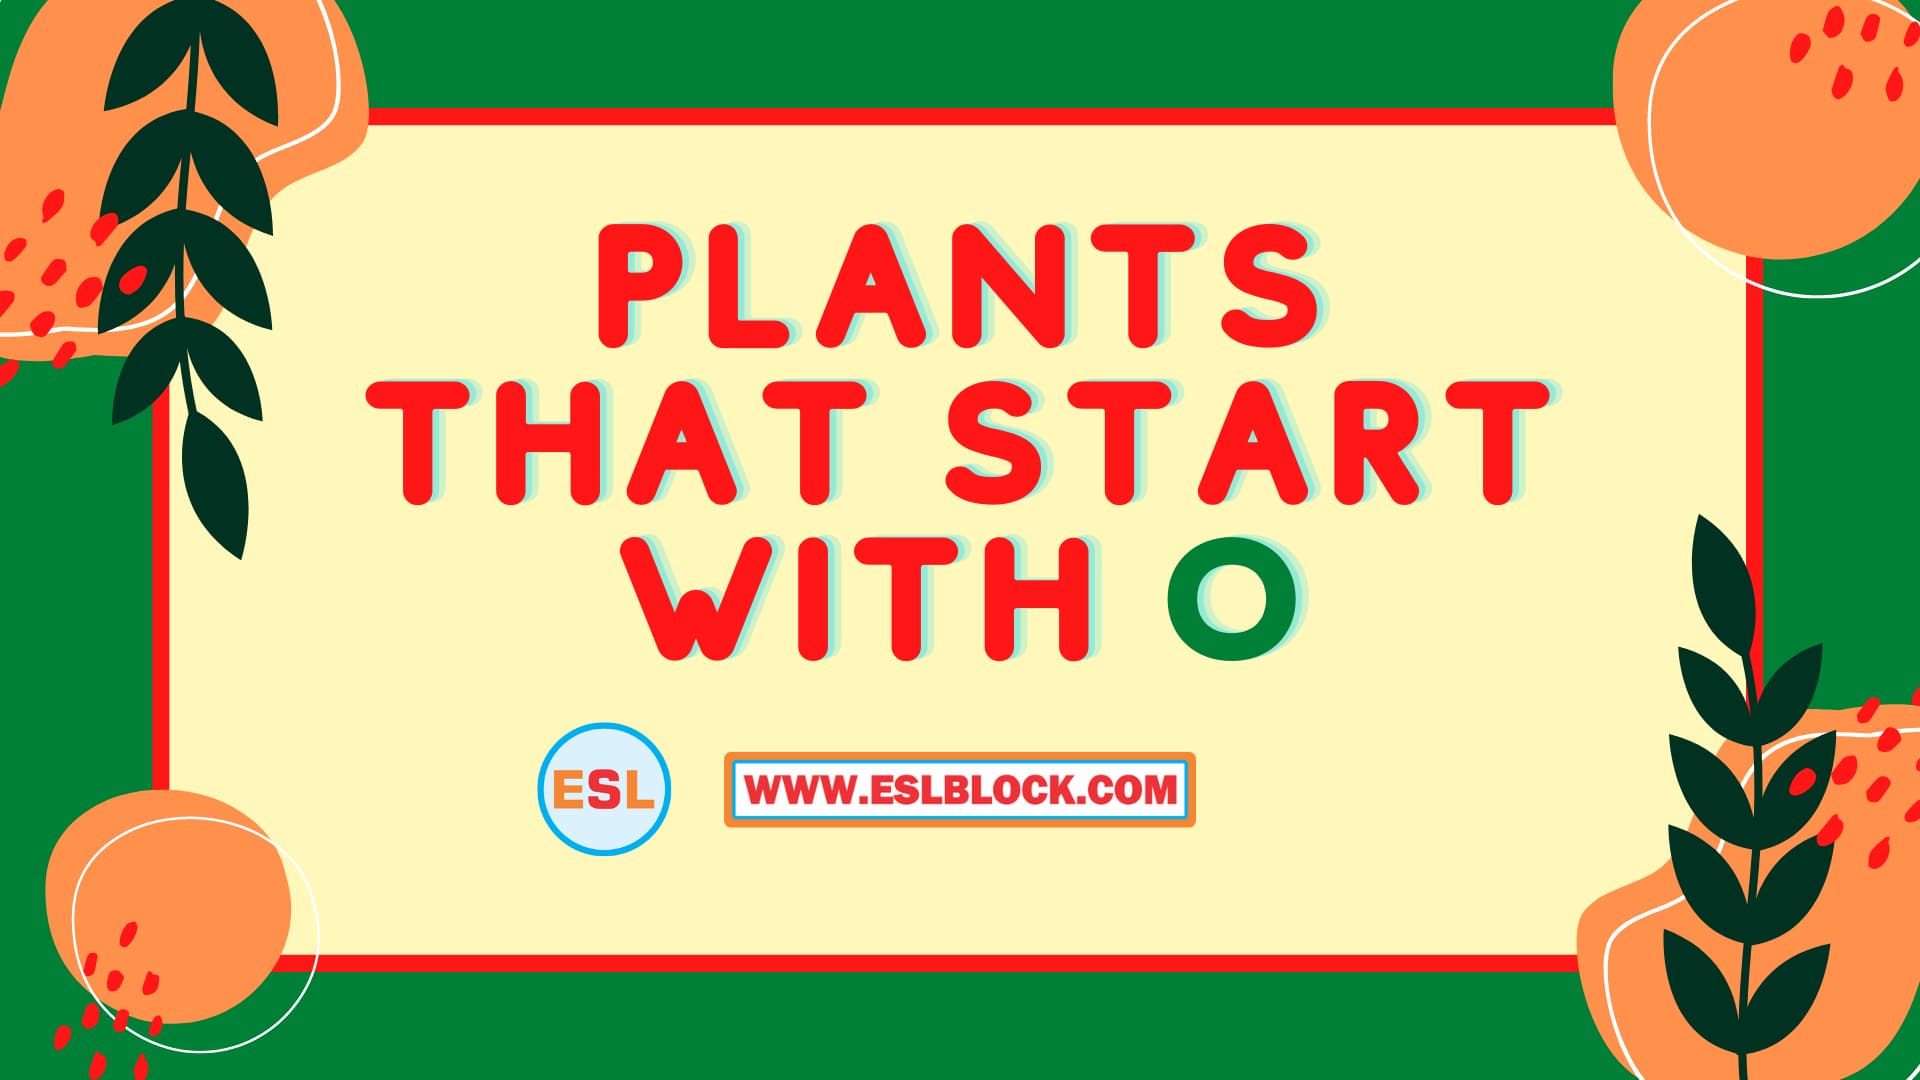 4 Letter Plants, 5 Letter Plants Starting With O, English, English Grammar, English Vocabulary, English Words, List of Plants That Start With O, O Plants, O Plants in English, O Plants Names, Plants List, Plants Names, Plants That Start With O, Vocabulary, Words That Start With O